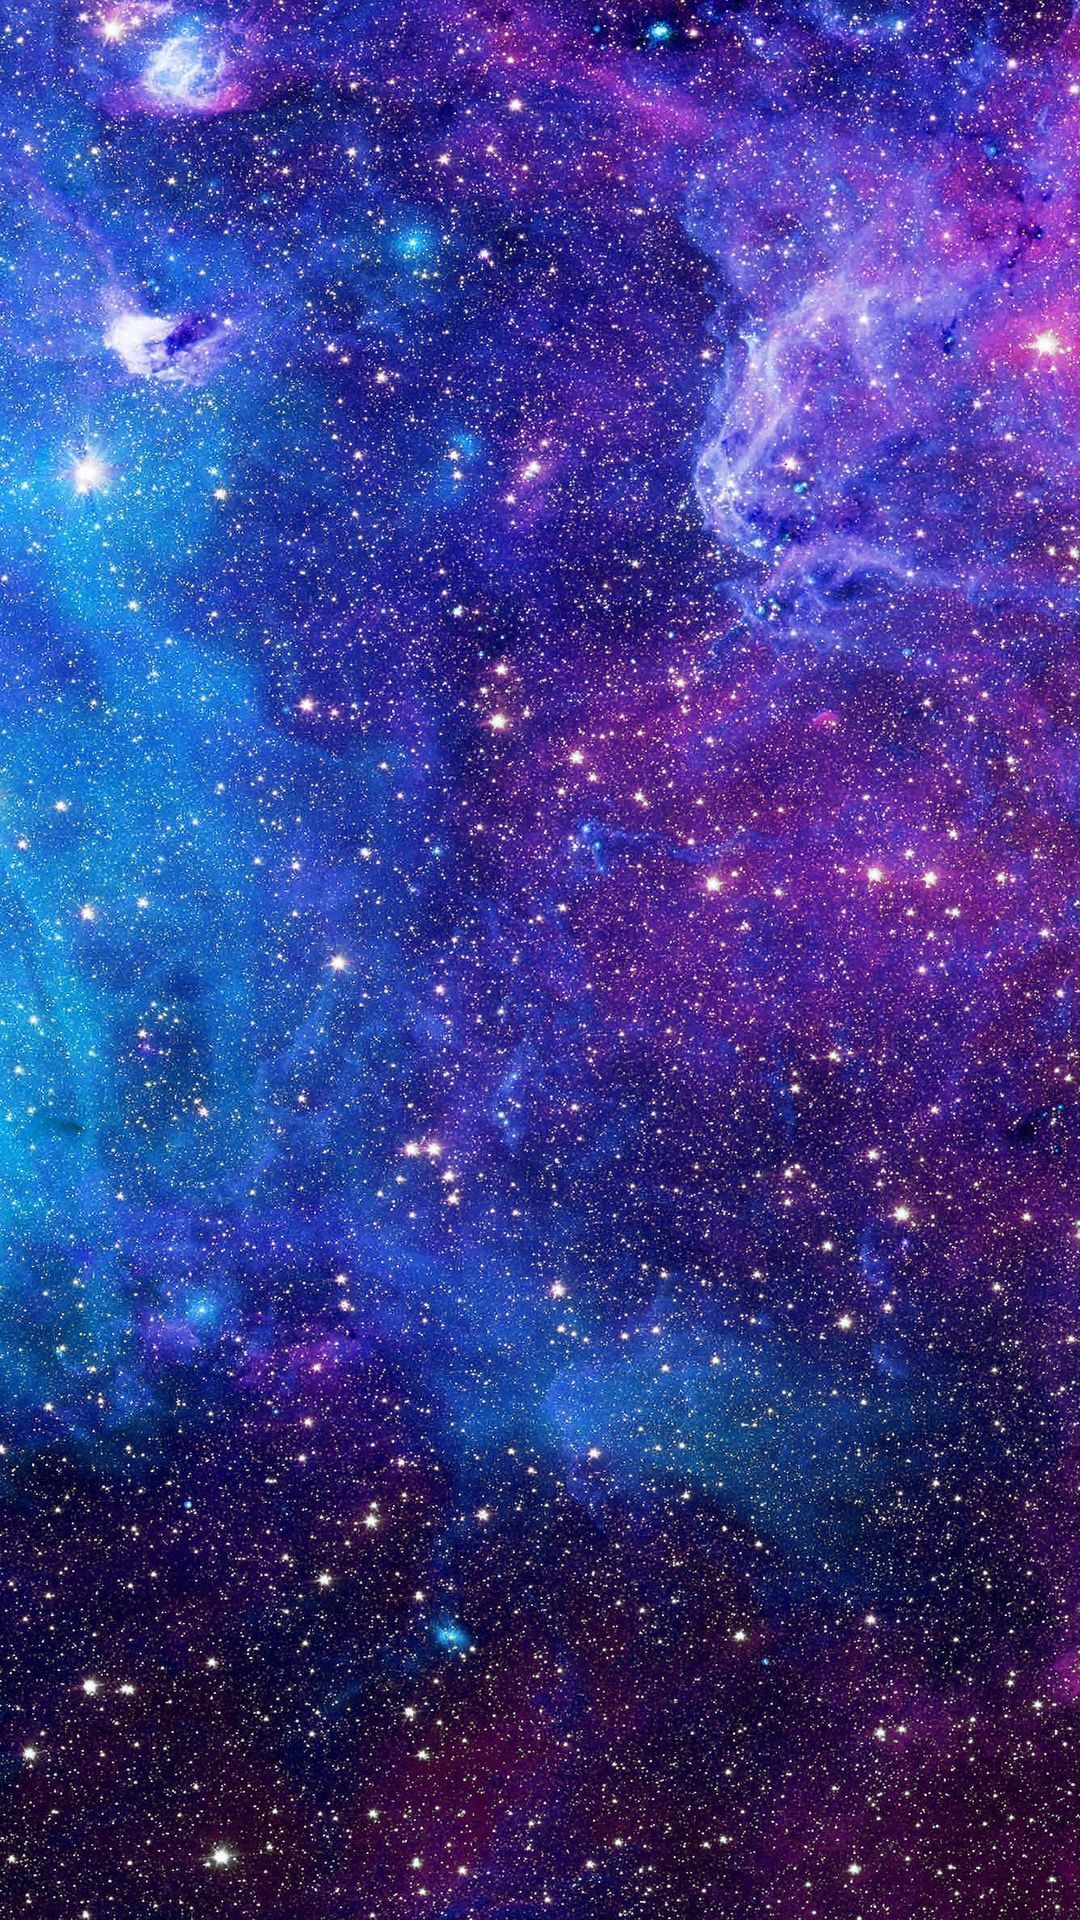 Purple, Nebula, Blue, Violet, Outer space, Astronomical object iphone wallpaper. Purple galaxy wallpaper, Galaxies wallpaper, Blue wallpaper iphone